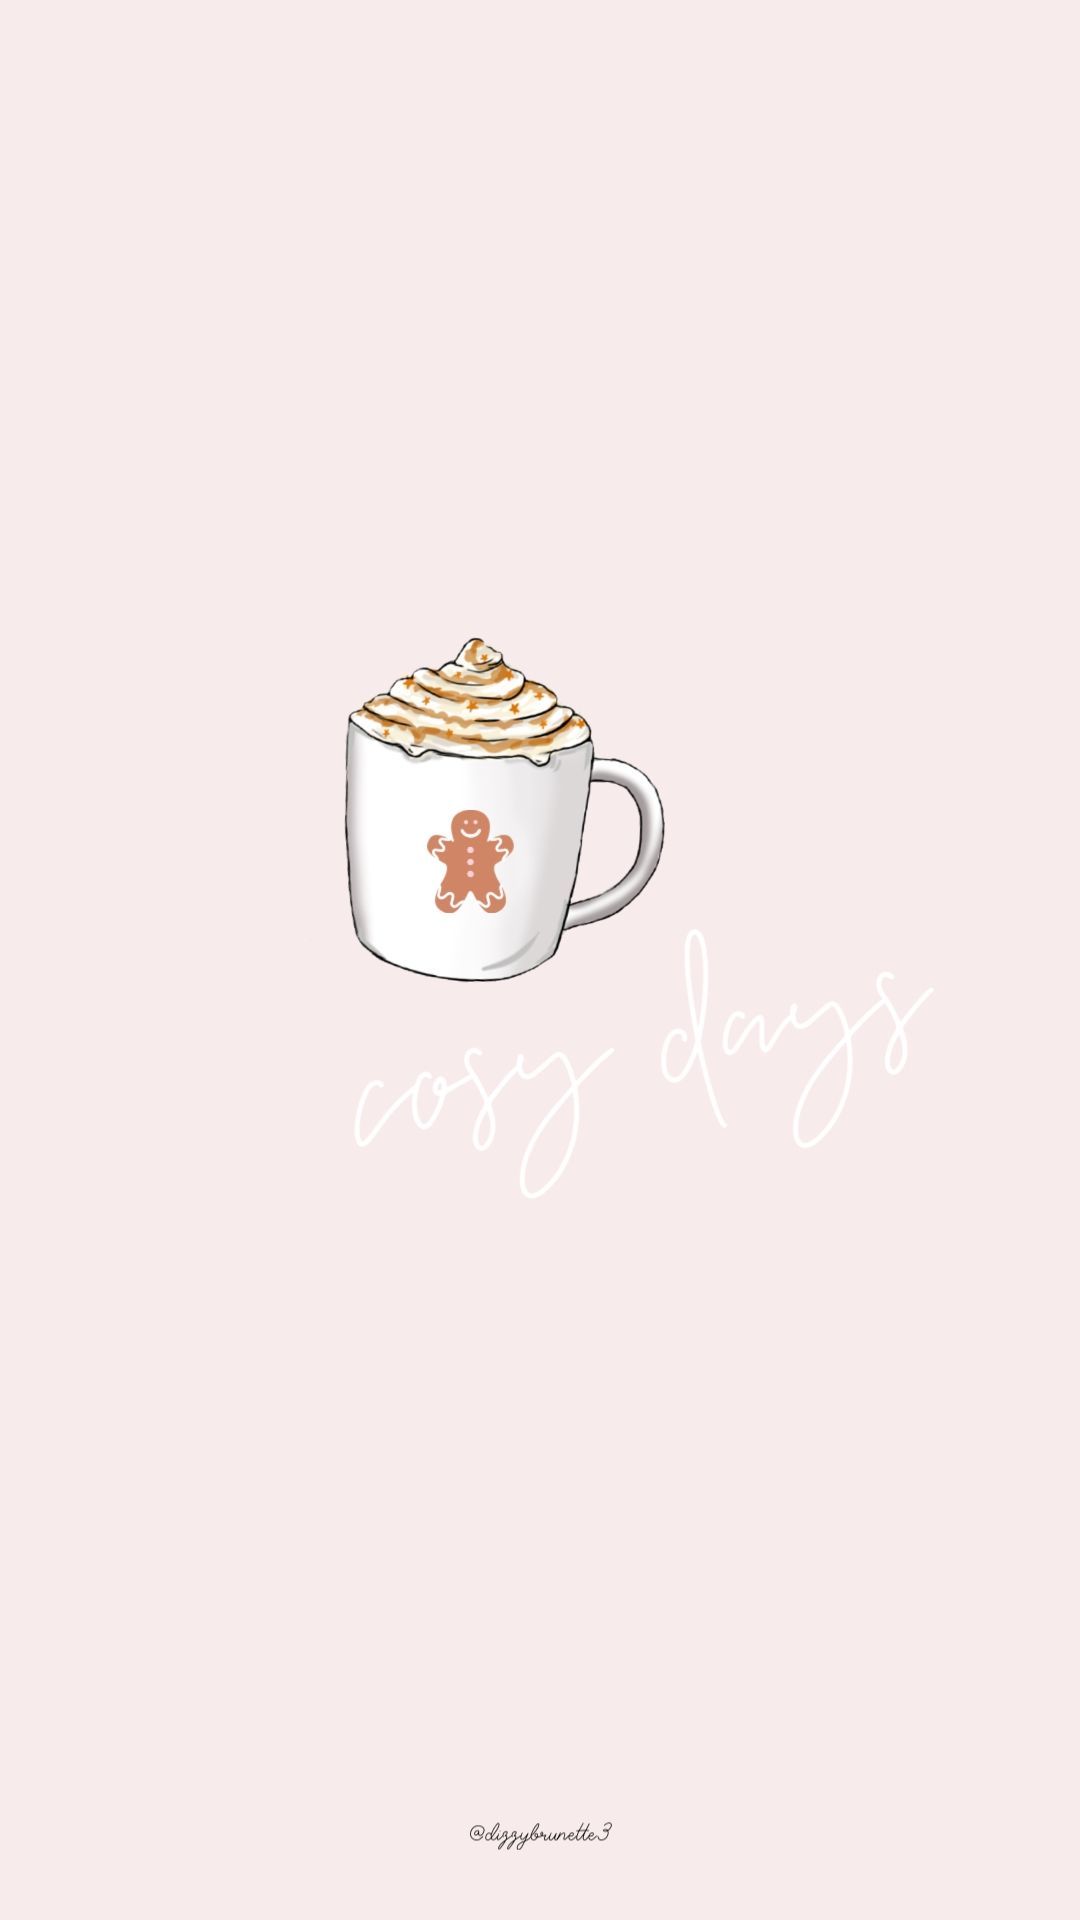 A gingerbread latte illustration with the words 